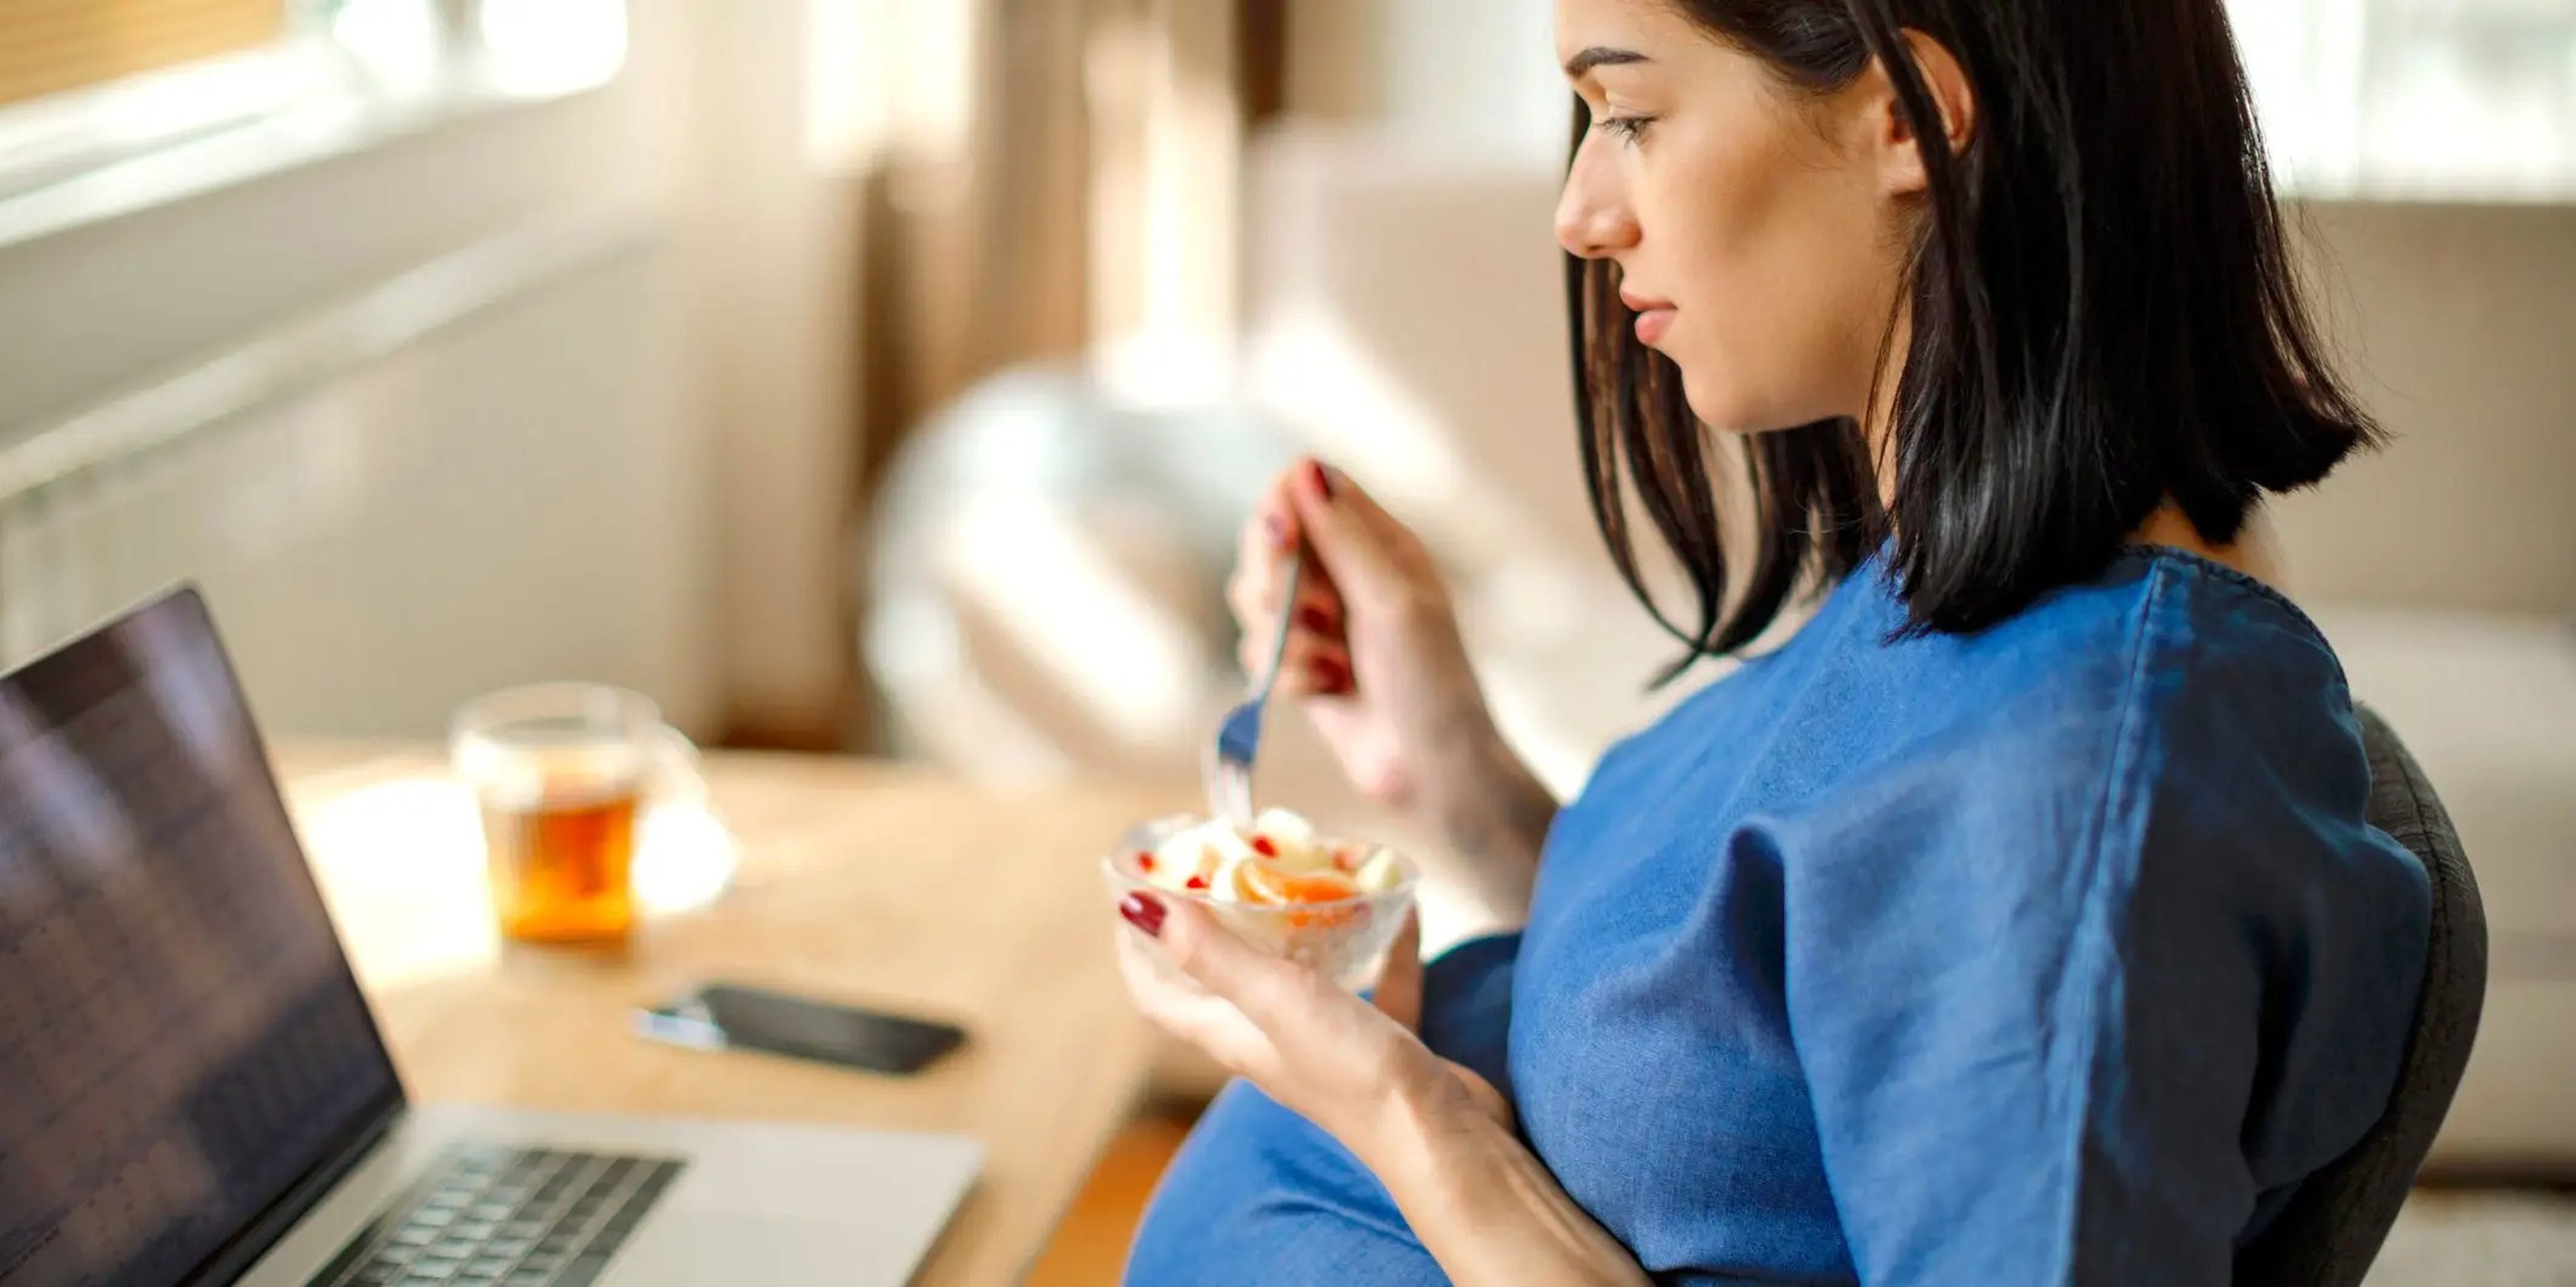 A pregnant woman snacking on a bowl of yogurt and peaches.